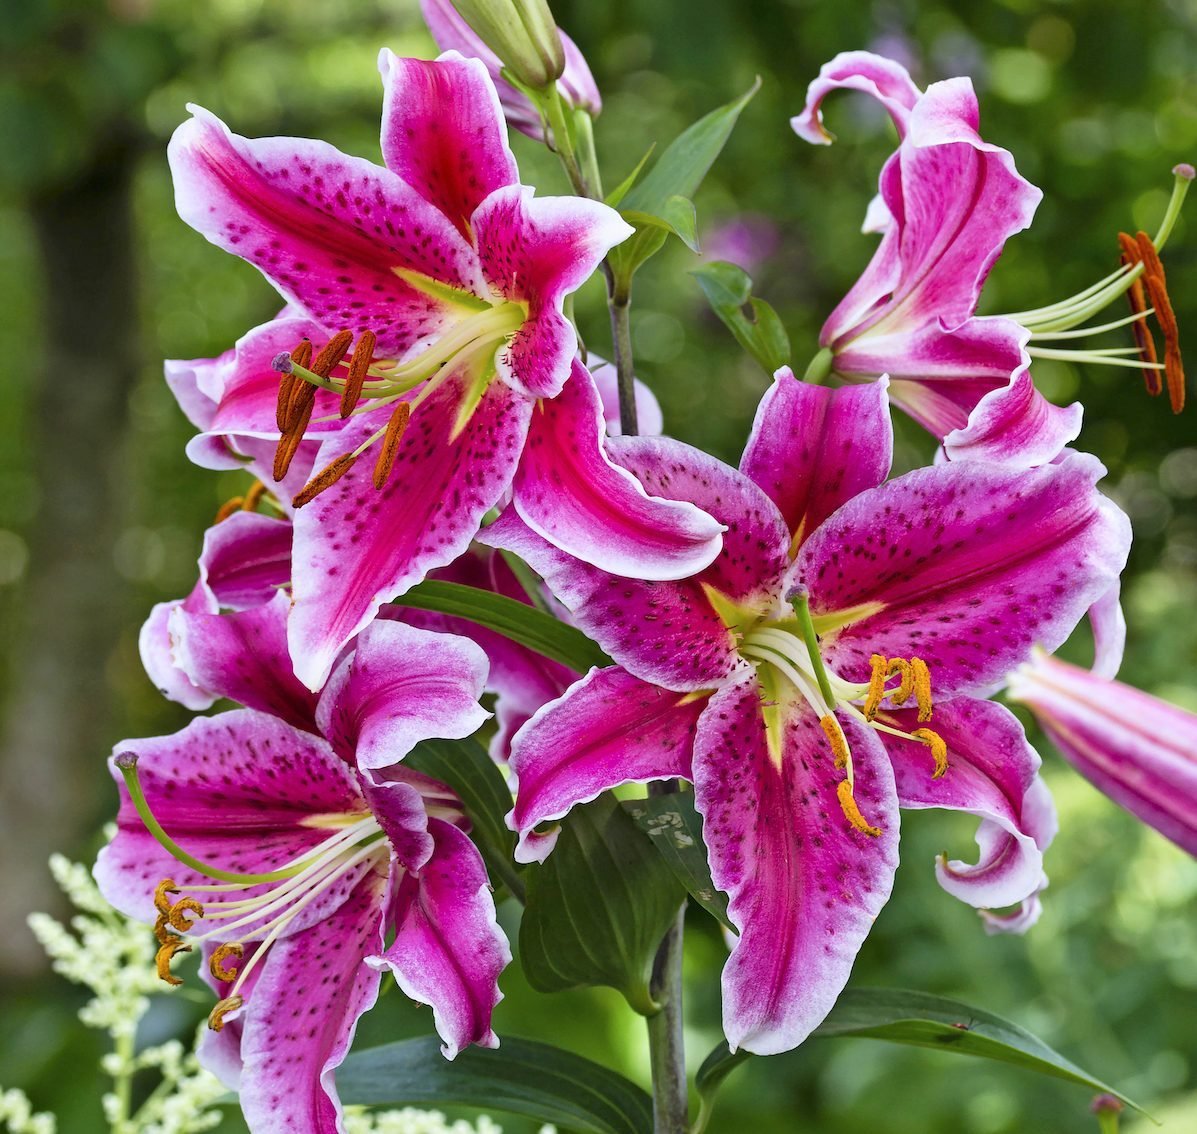 Asiatic Lilies for Sale, Pink Flight Asiatic Lily